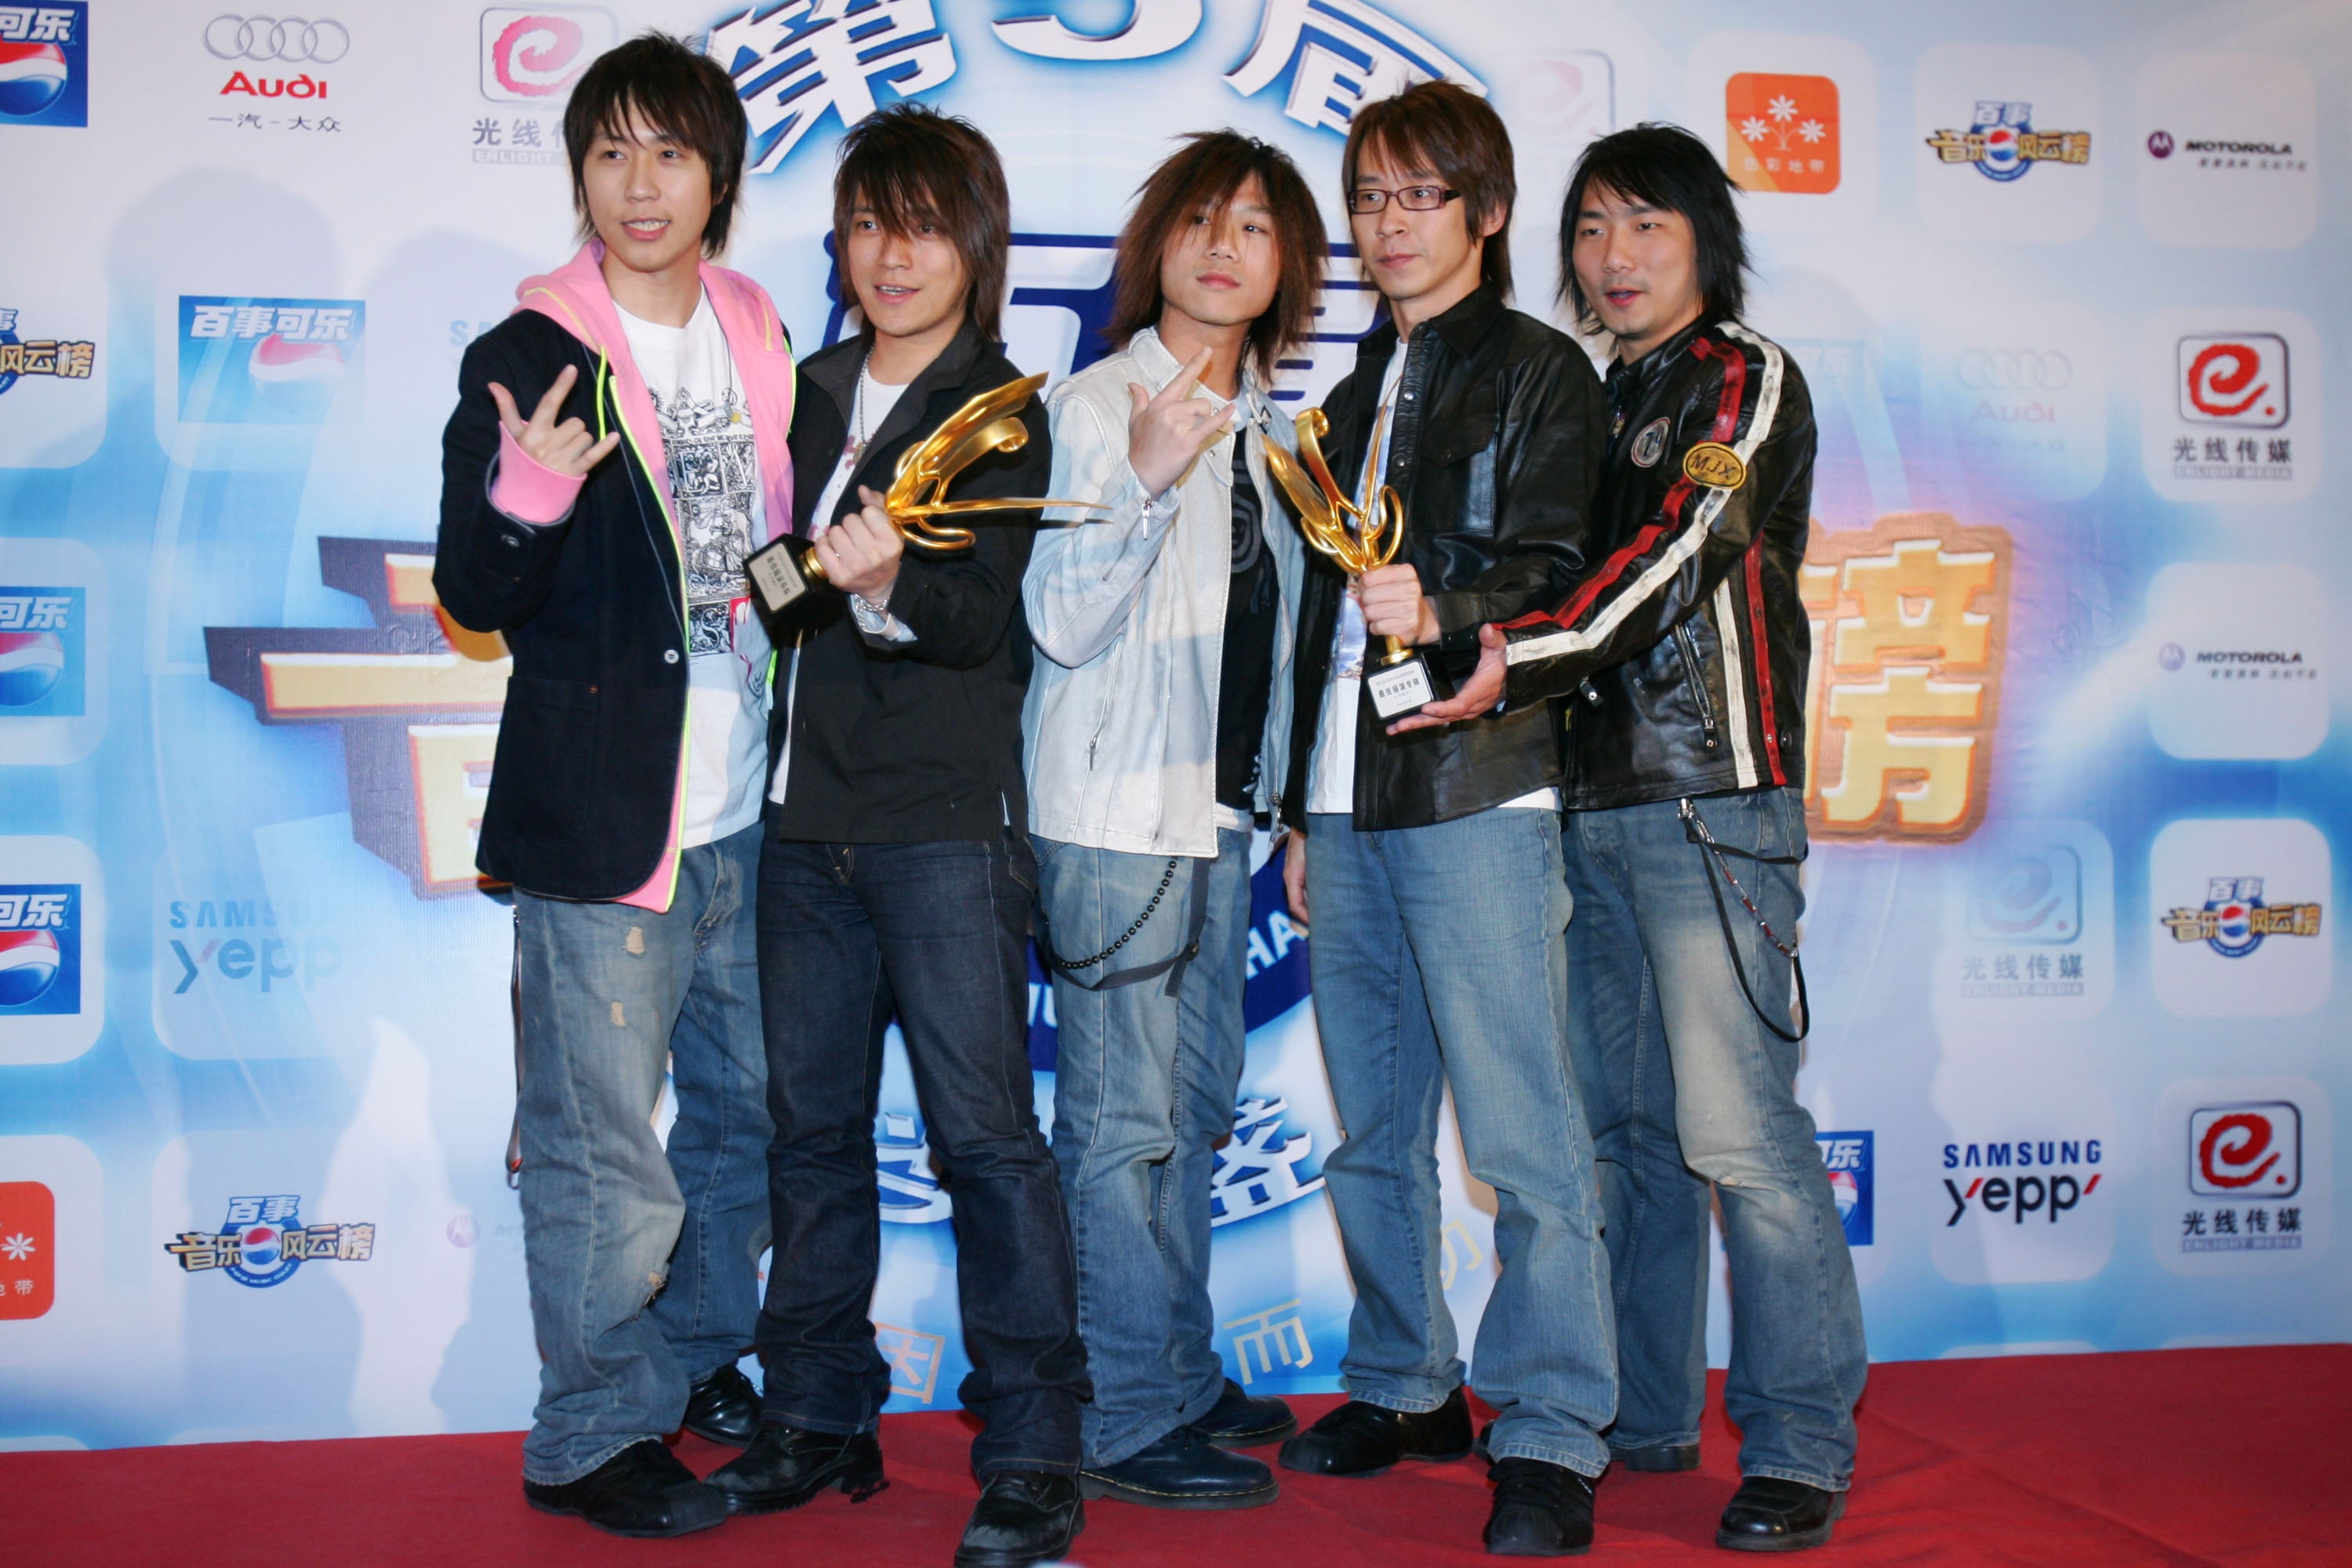 Members of Taiwan singing group ‘Mayday’ pose for pictures at 5th Pepsi Music Chart Awards ceremony on 20 March 2005 in Beijing, China